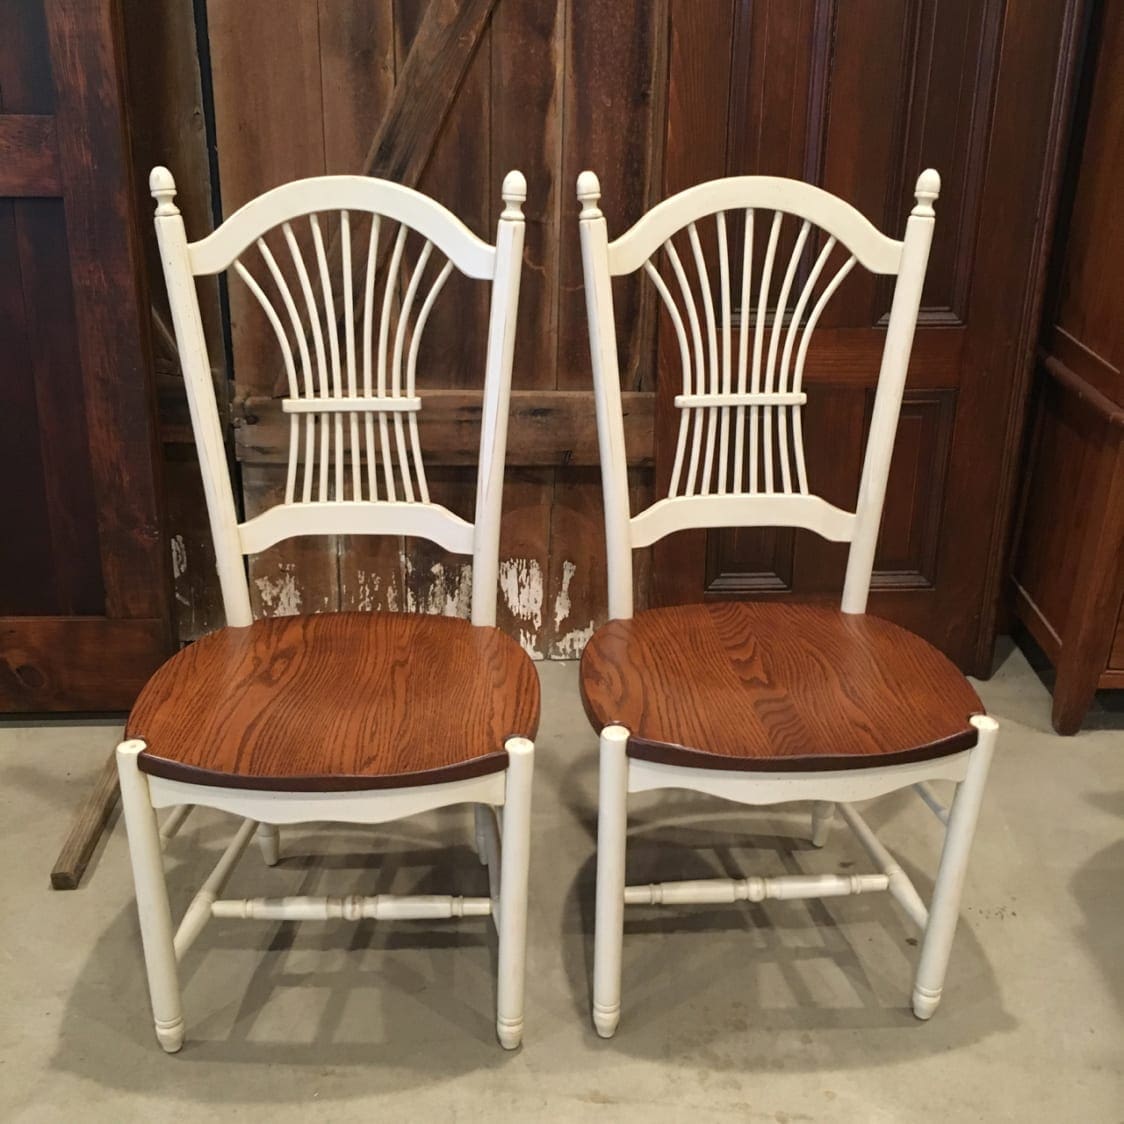 sheafback chairs